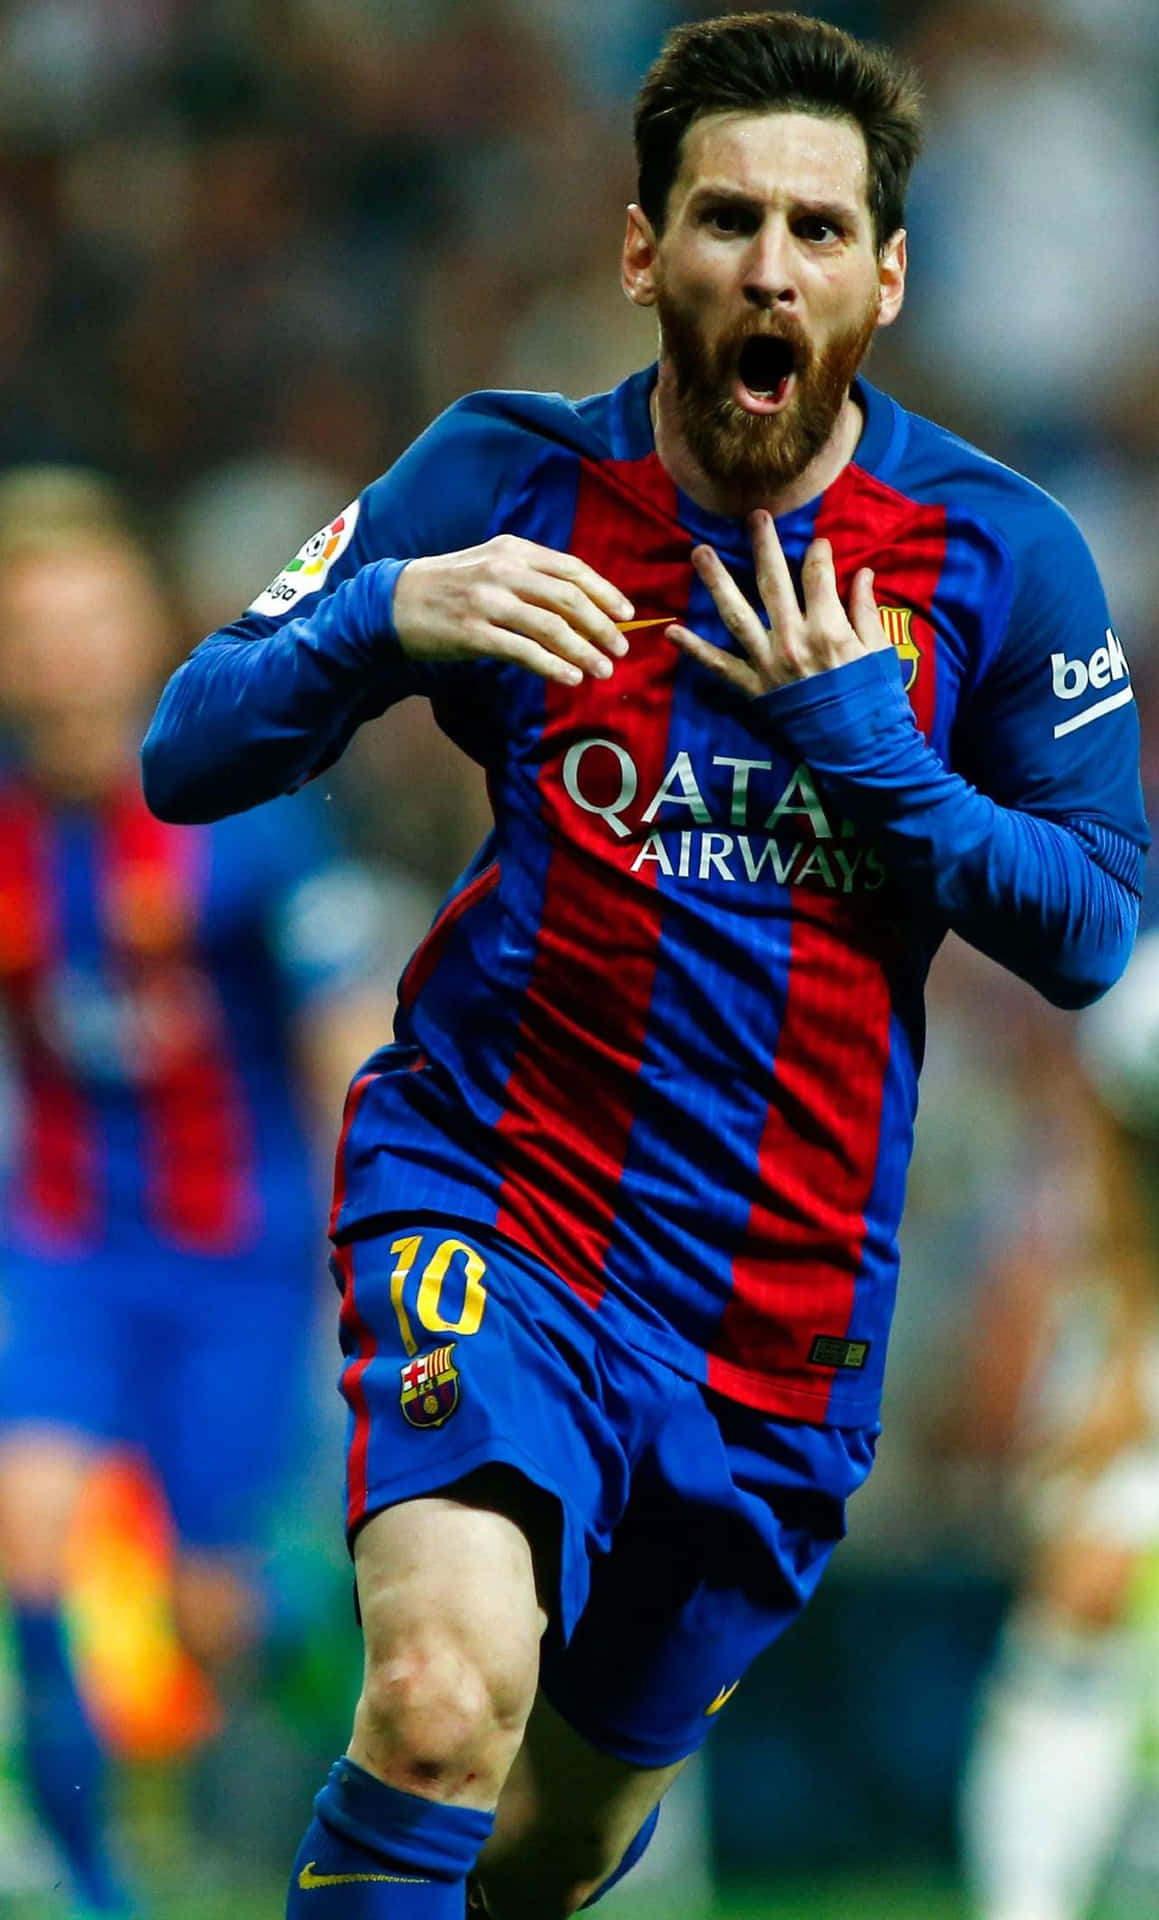 55 Messi iPhone Wallpapers  Download at WallpaperBro  Lionel messi Messi  Lionel messi wallpapers